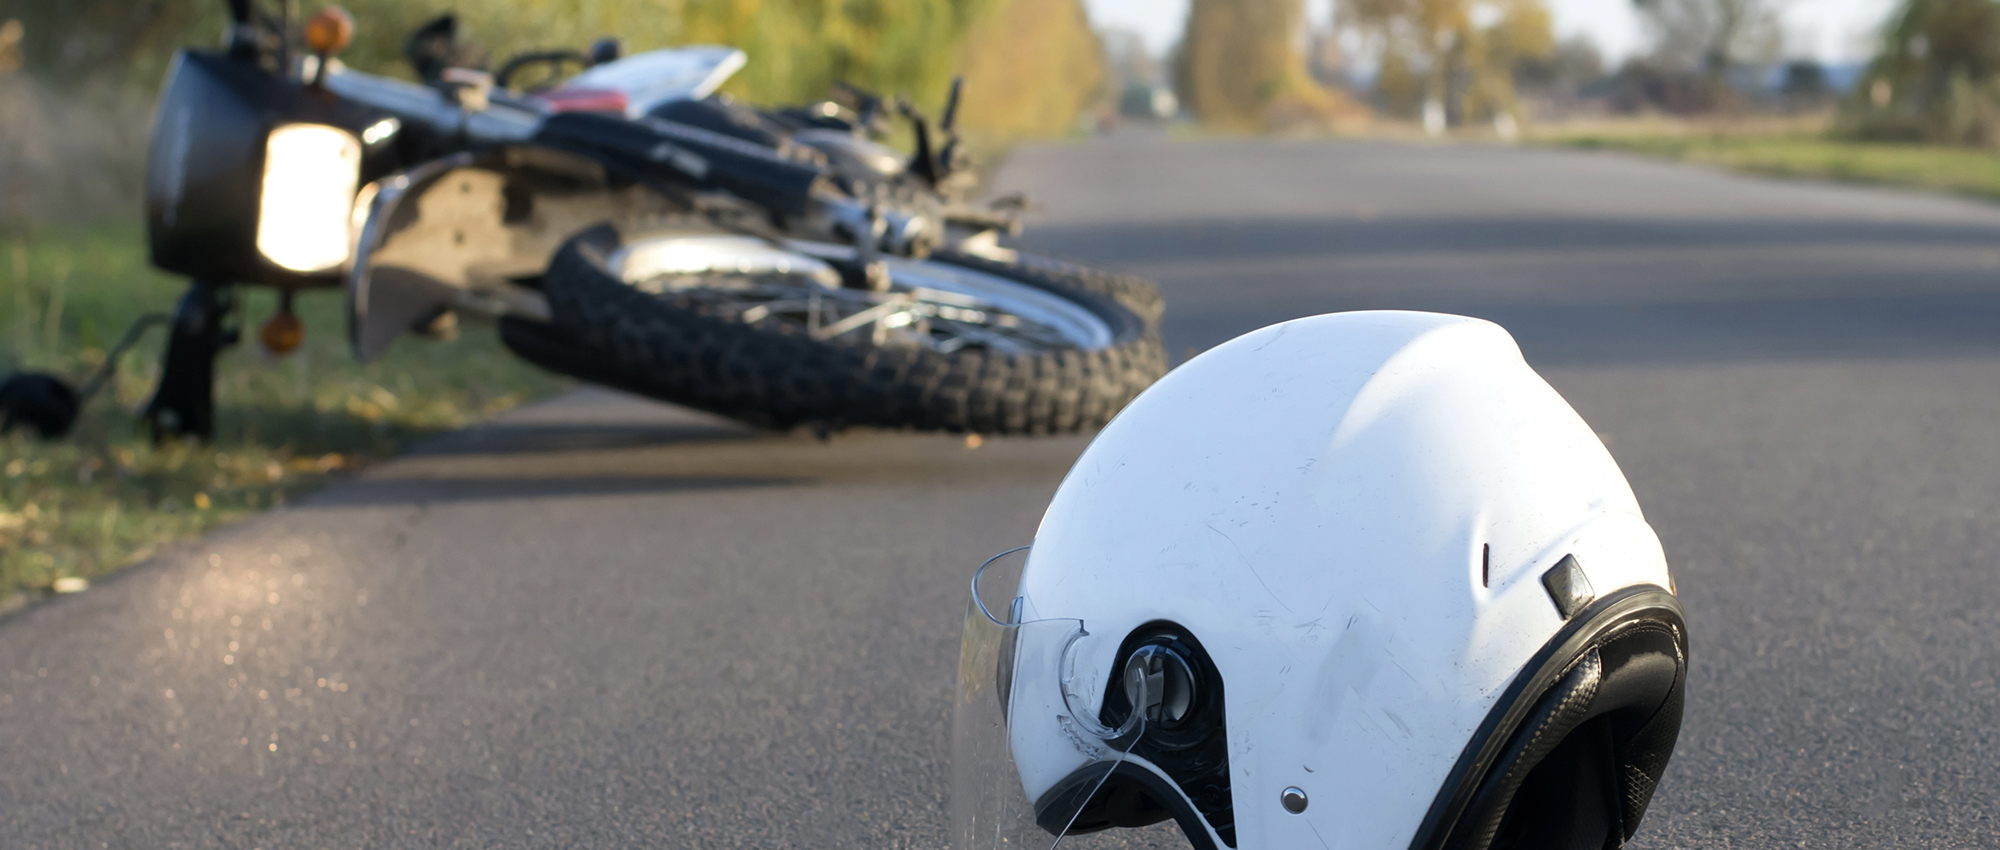 Motorcycle and helmet lie on the road after an accident.